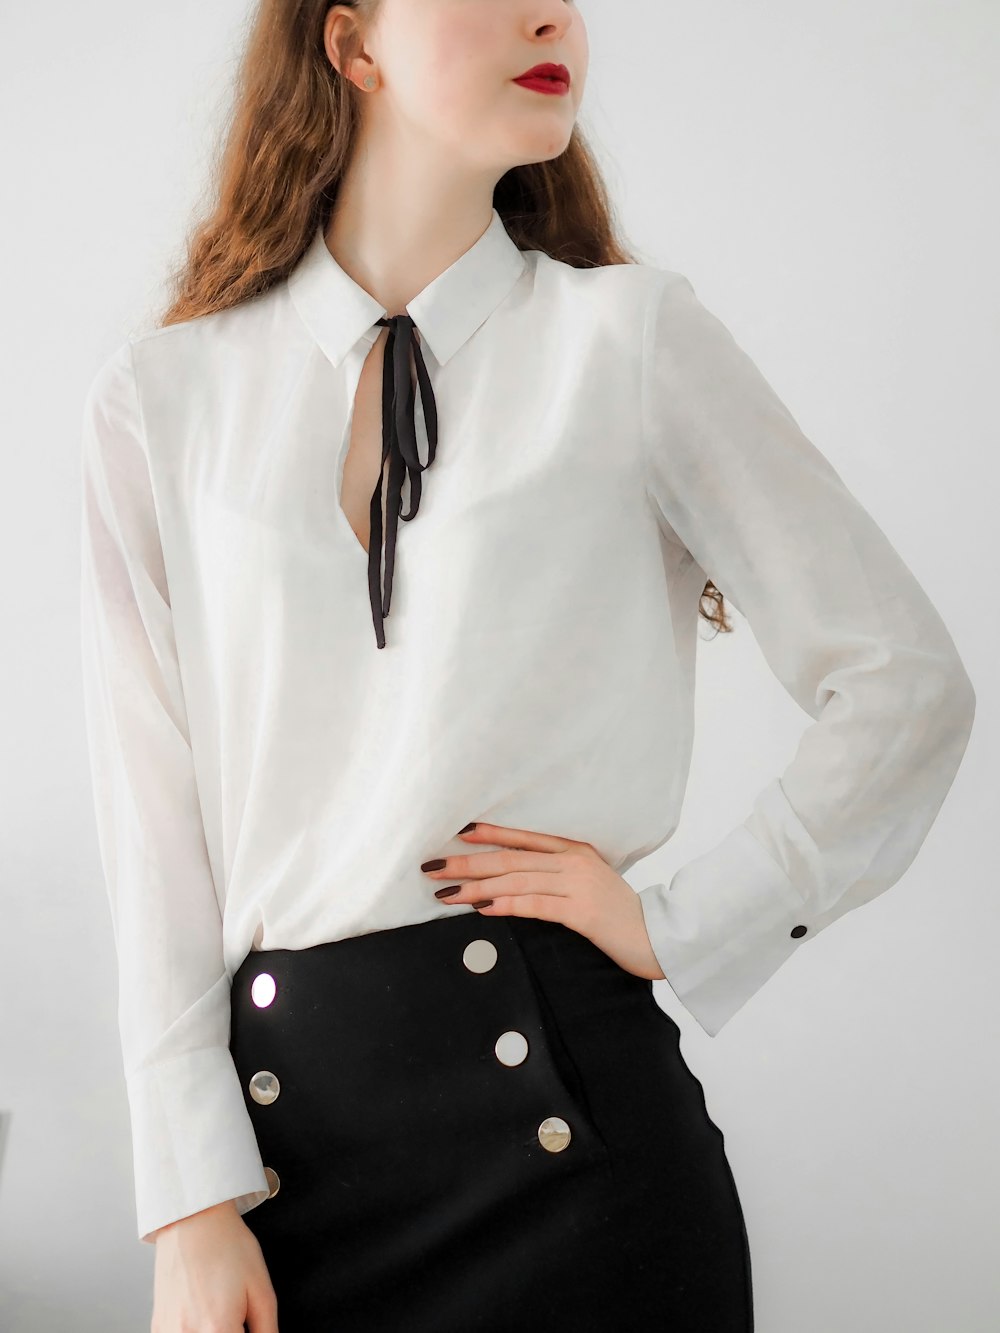 White Blouse Pictures | Download Free Images on Unsplash